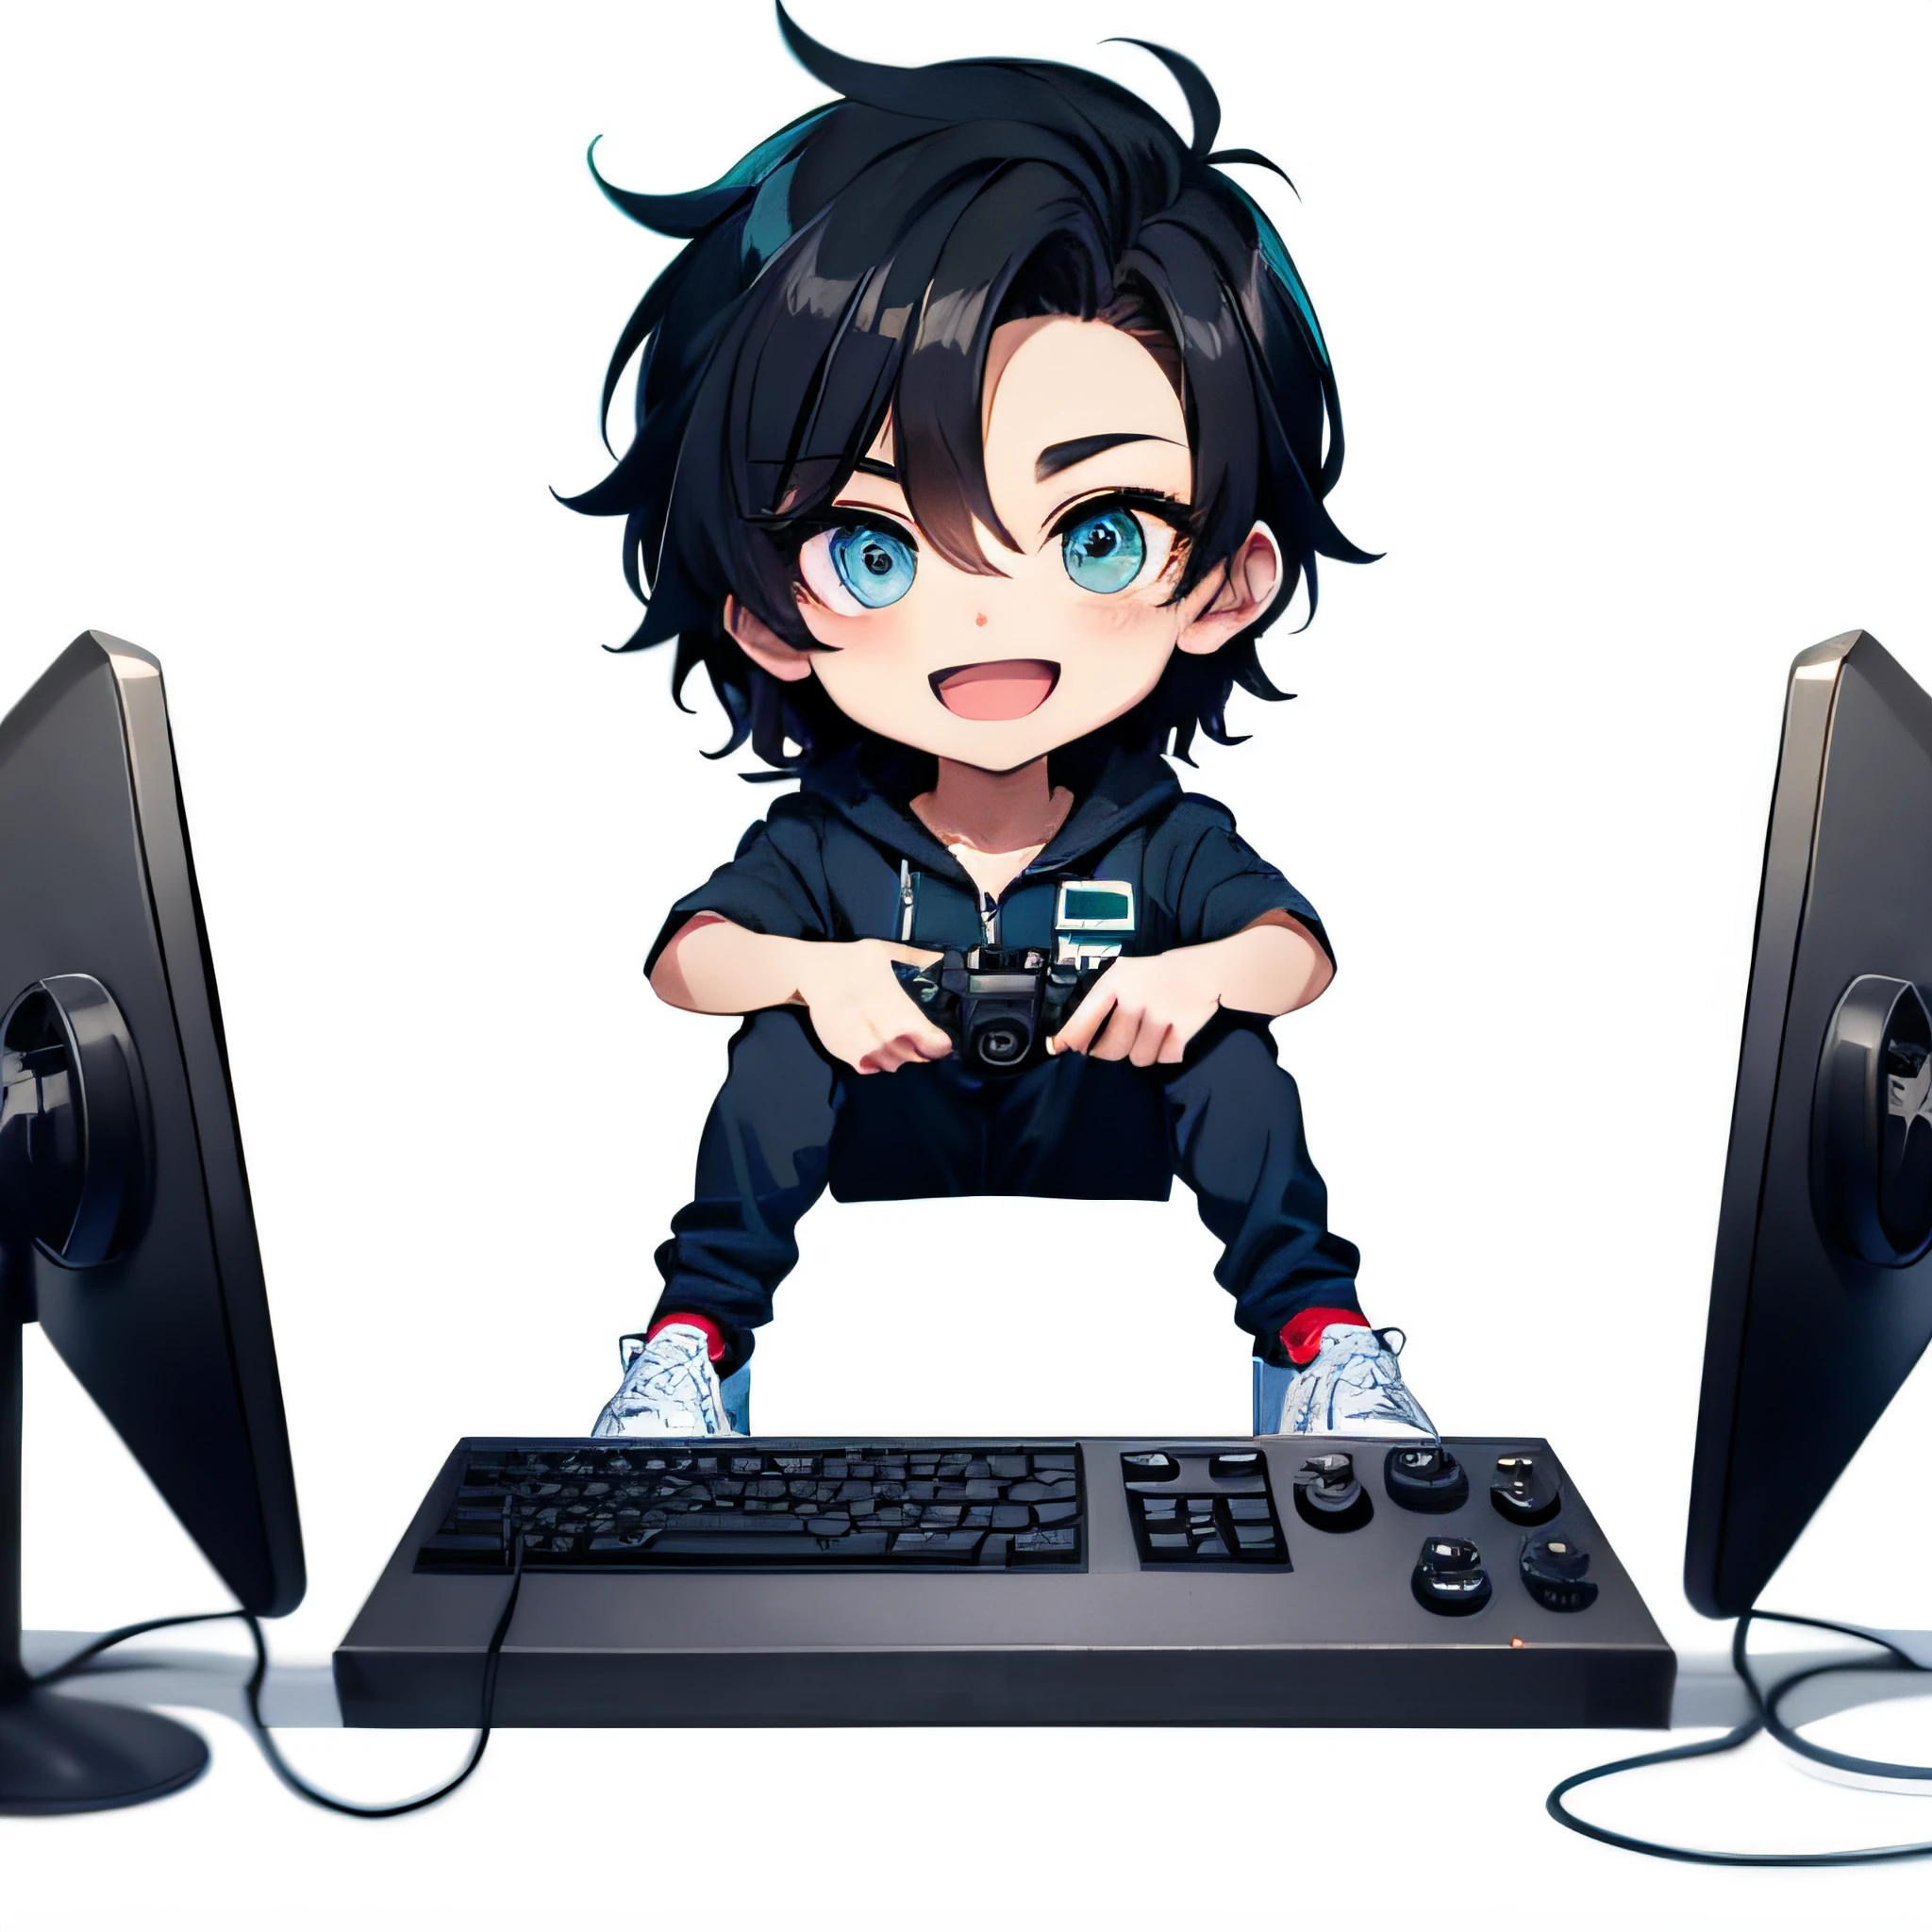 1boy, 独奏, (emote twitch: 1), chibi, Bblack hair, eyes browns, large gaming headset, holding joystick, Grinning, upperbody, Cartoon s, White background, sticker, thick black outlines,